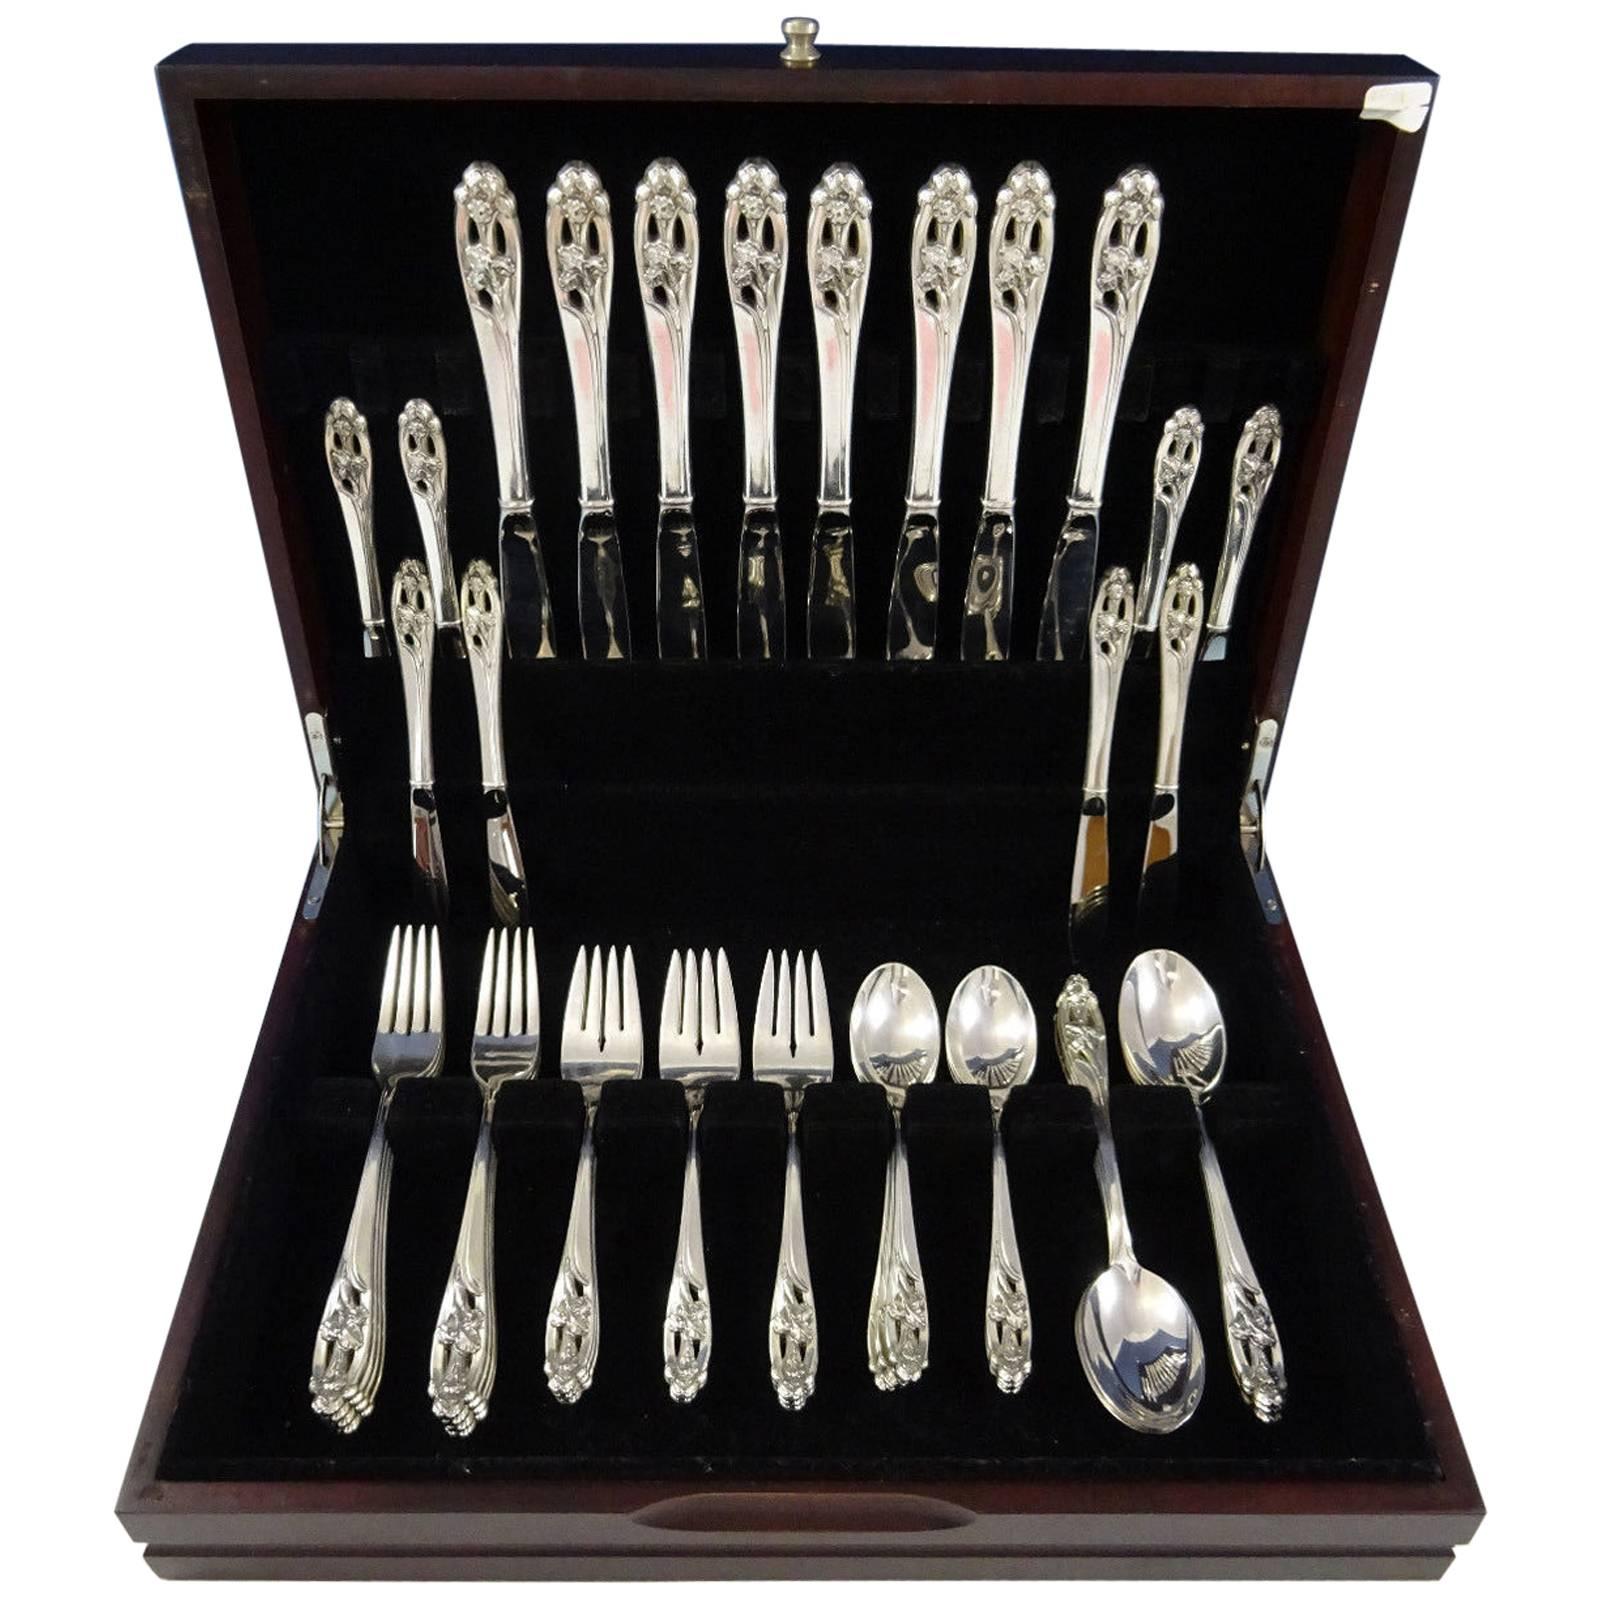 Silver Iris by international sterling silver flatware set with pierced handles, 48 pieces. This set includes:

Eight knives, 9 3/8